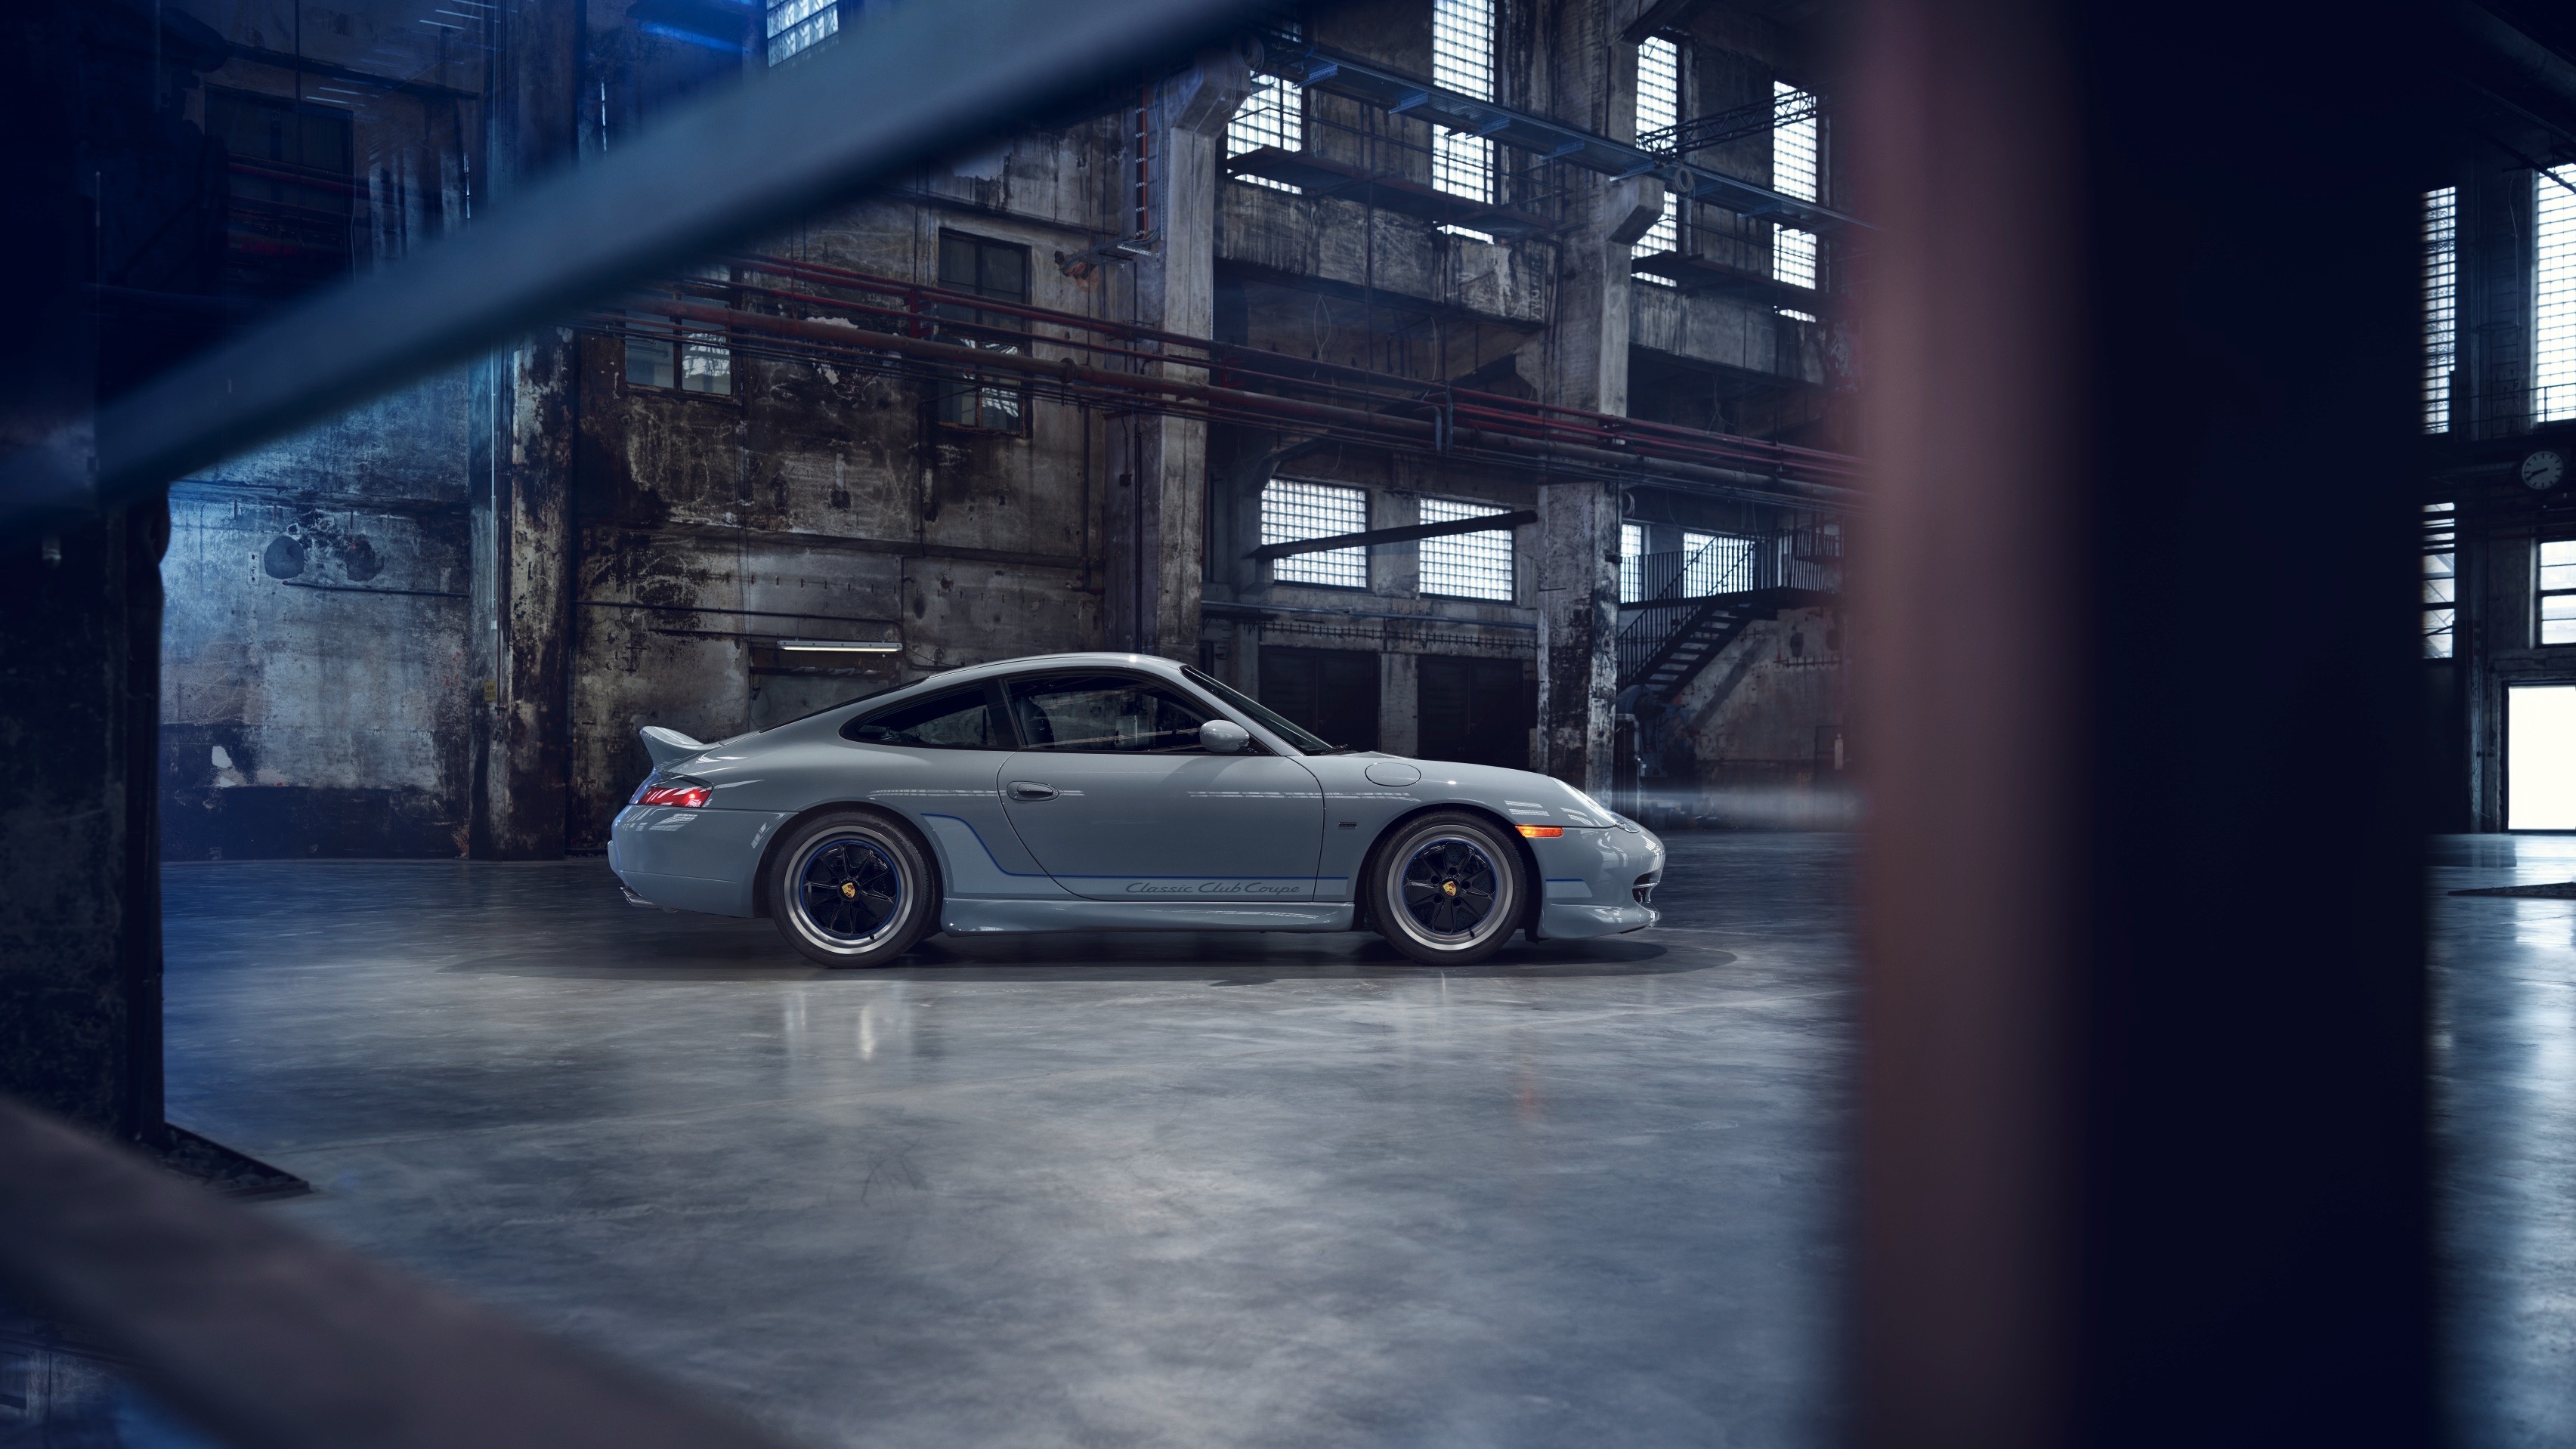 Porsche 911 Classic Club Coupe with Fuchs wheels in warehouse